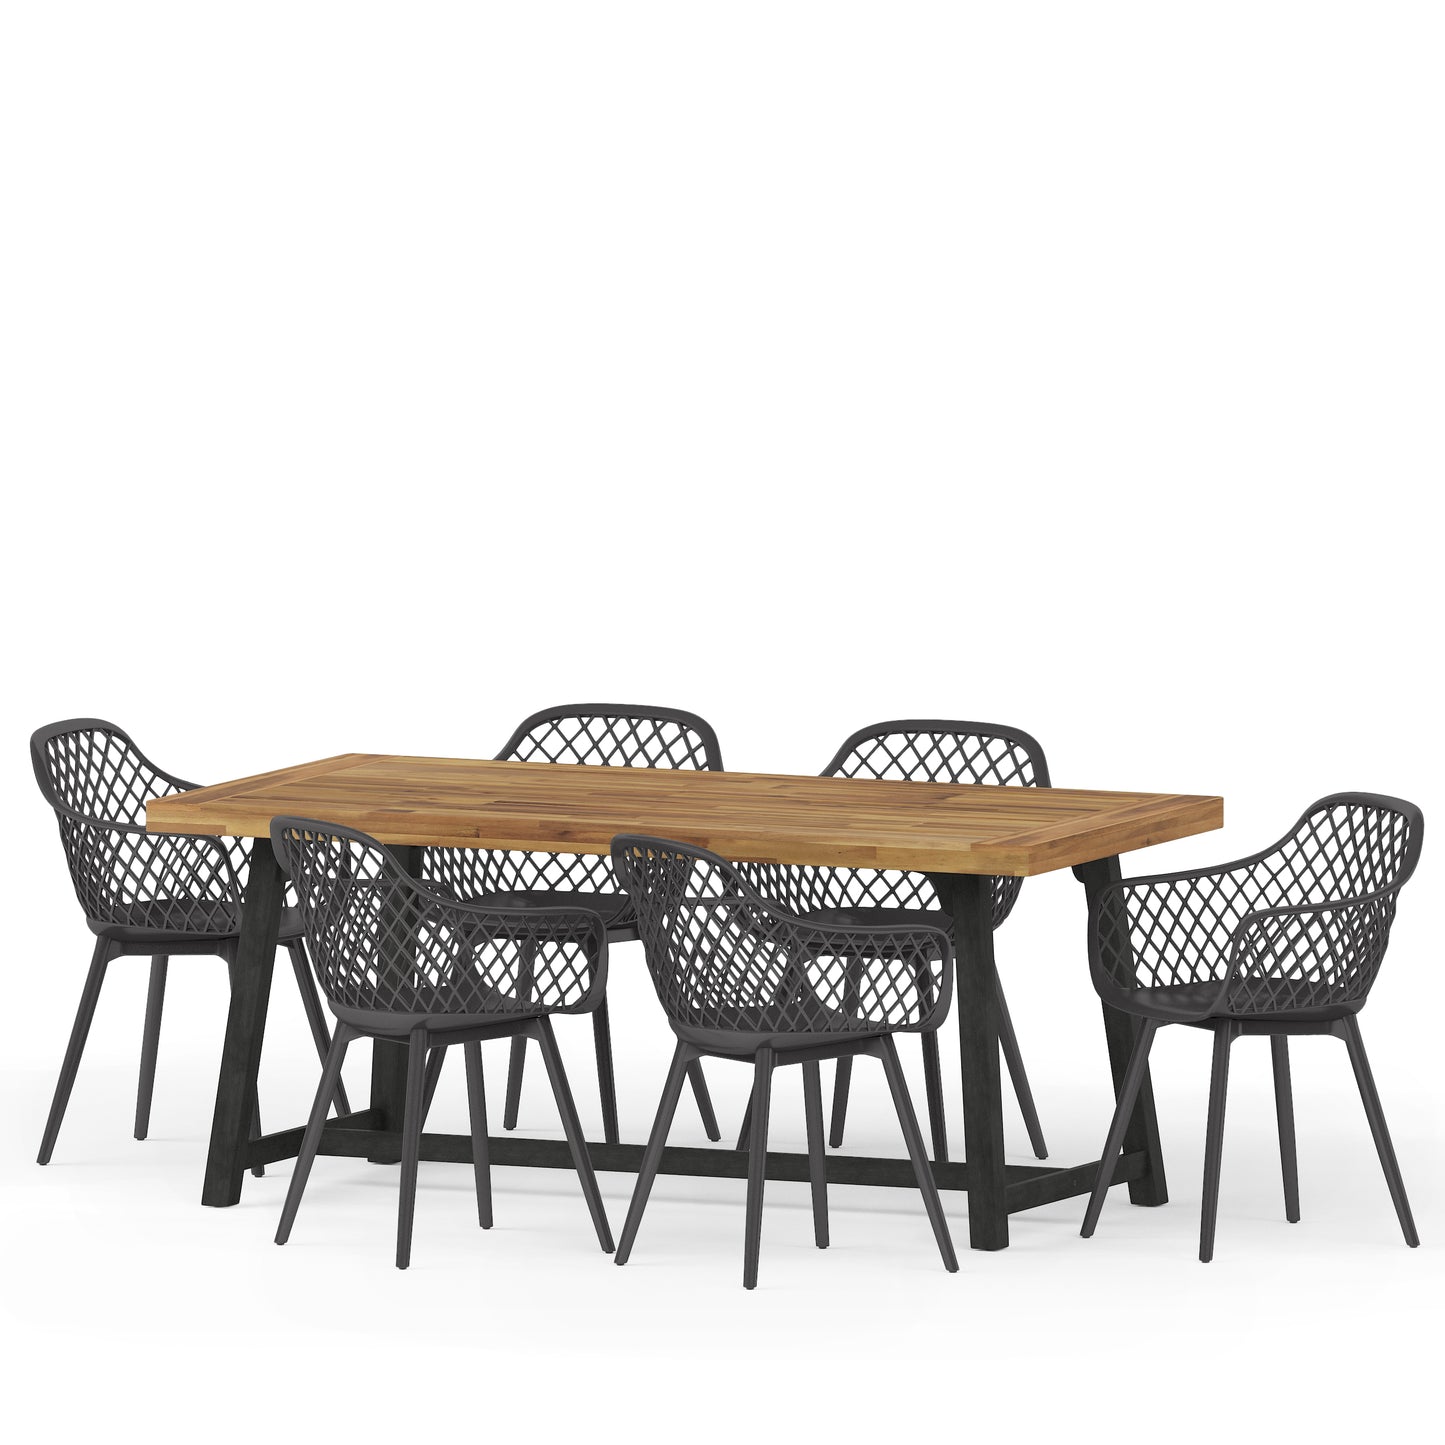 Requeta Outdoor Wood and Resin 7 Piece Dining Set, Black and Sandblasted Teak